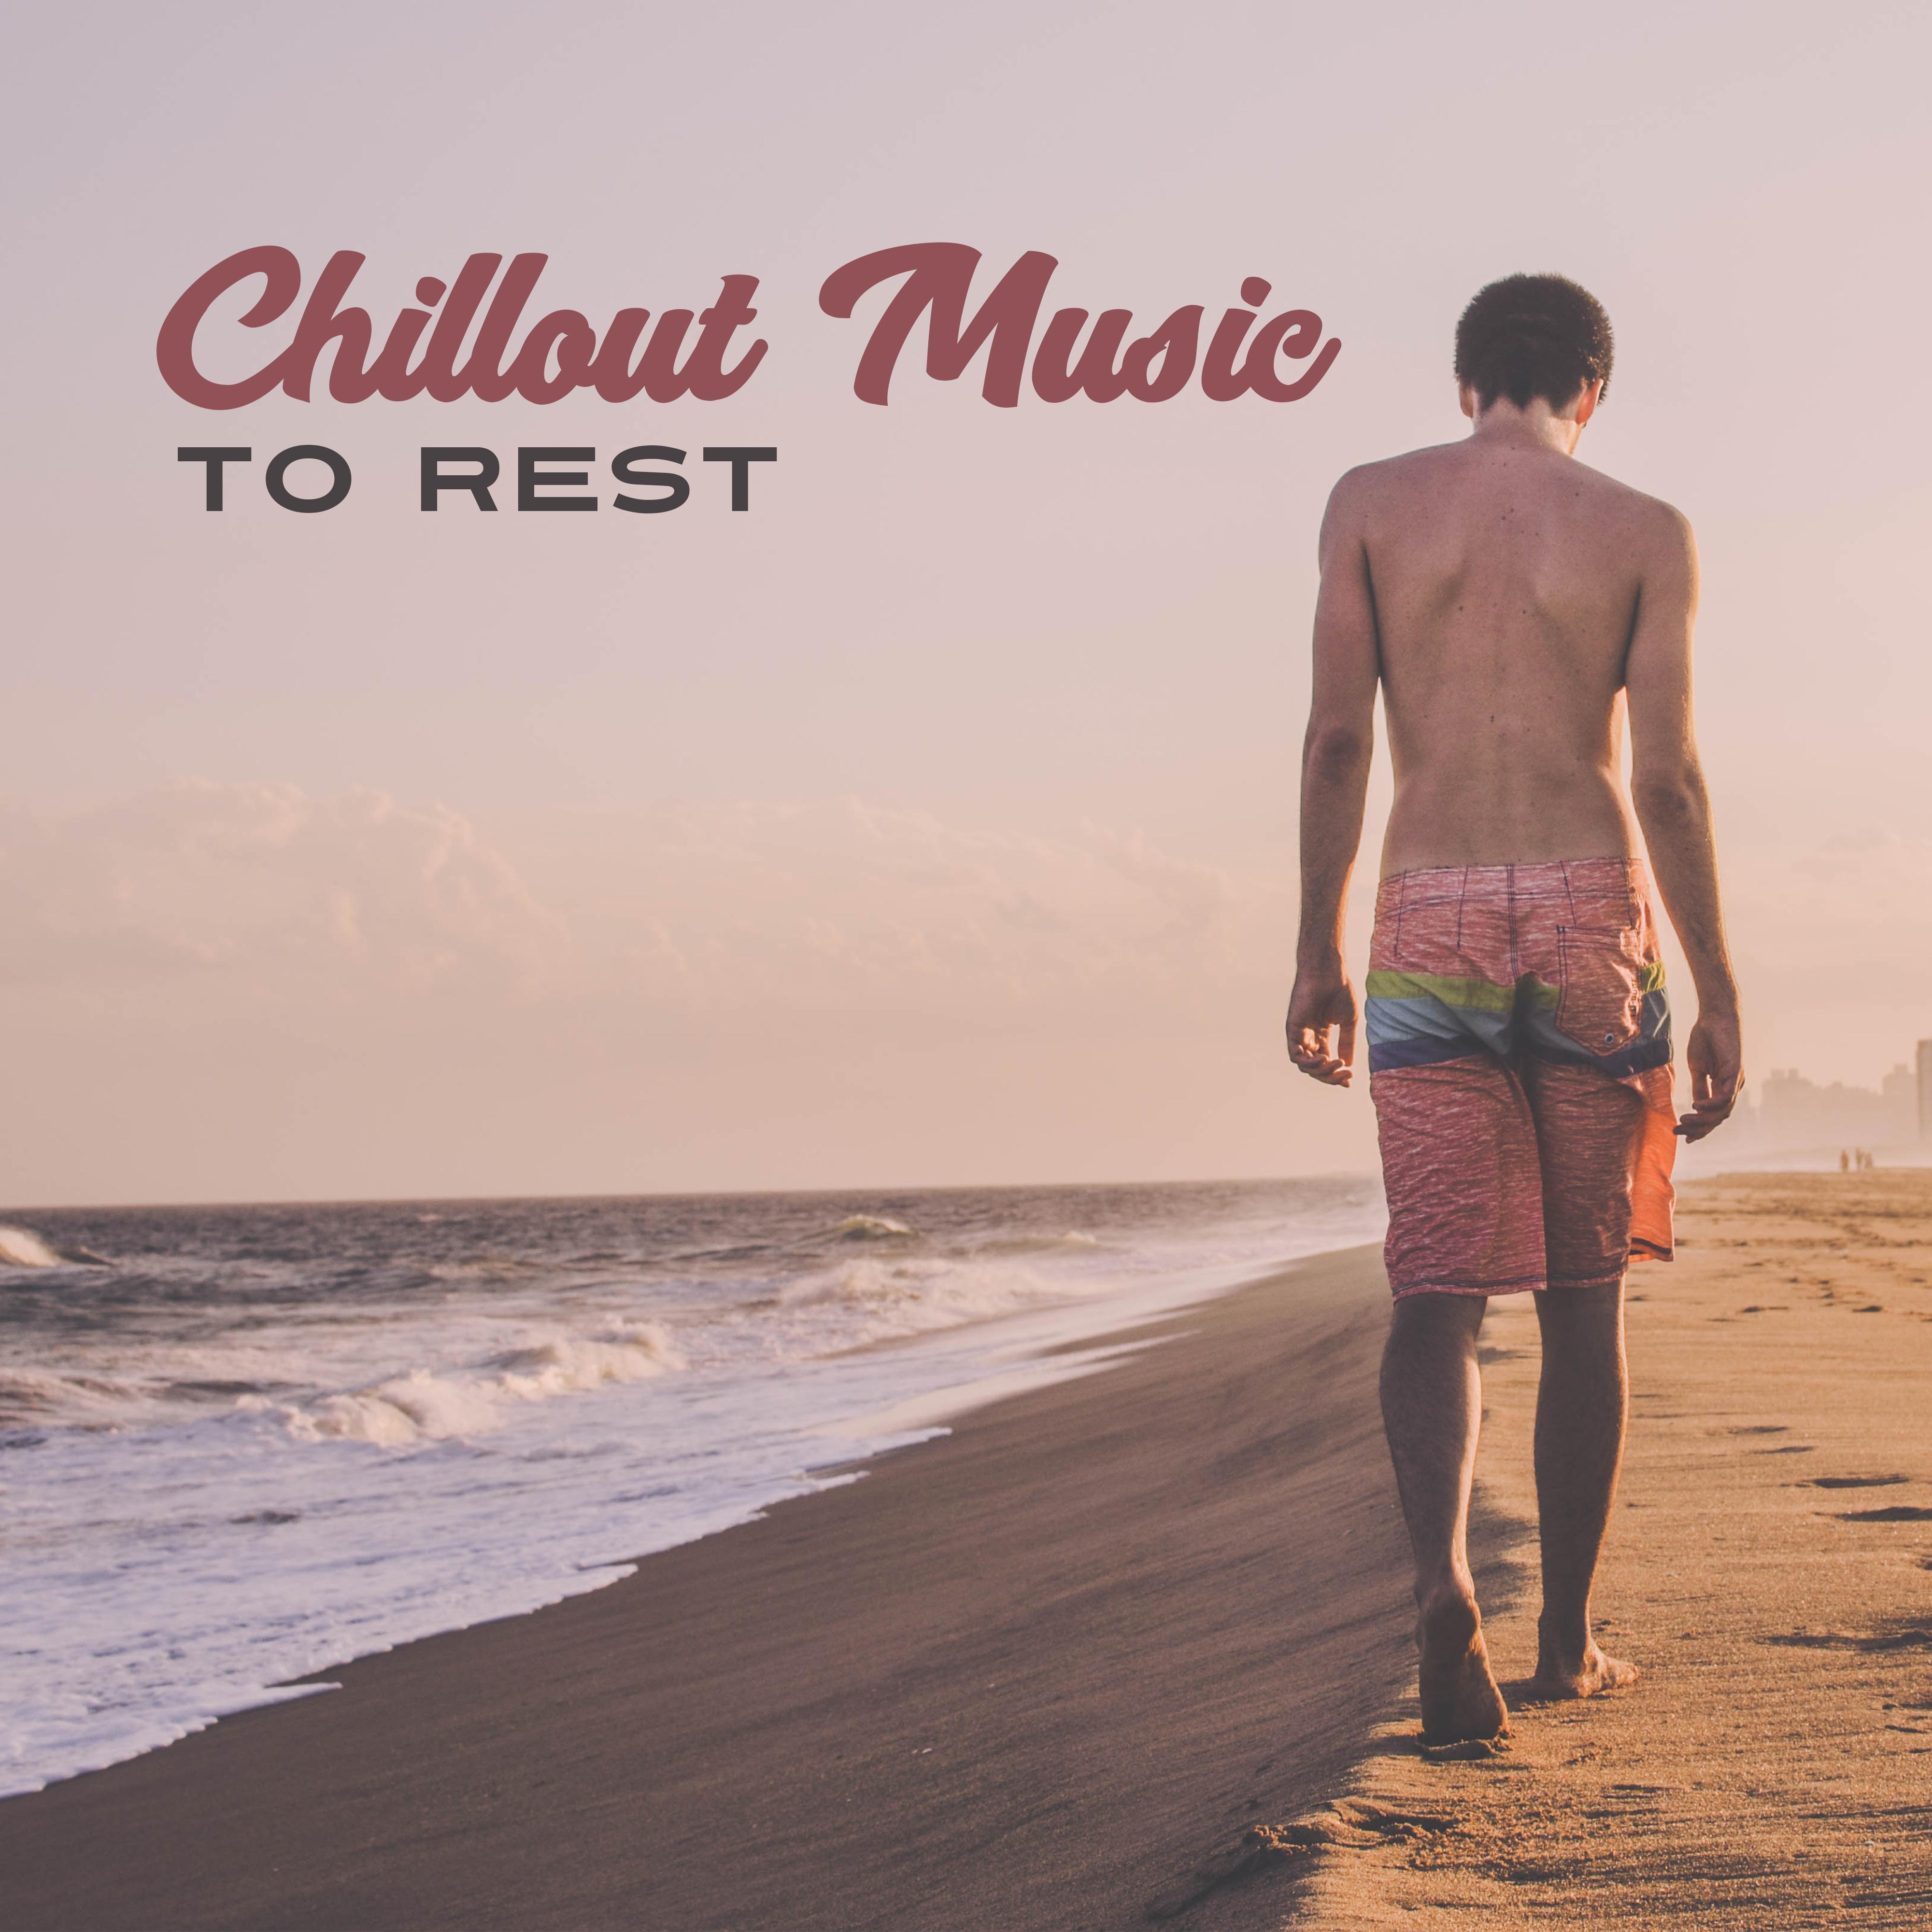 Chillout Music to Rest  Summer Rest, Easy Listening, Holiday Journey, Music to Relax, Rest a Bit